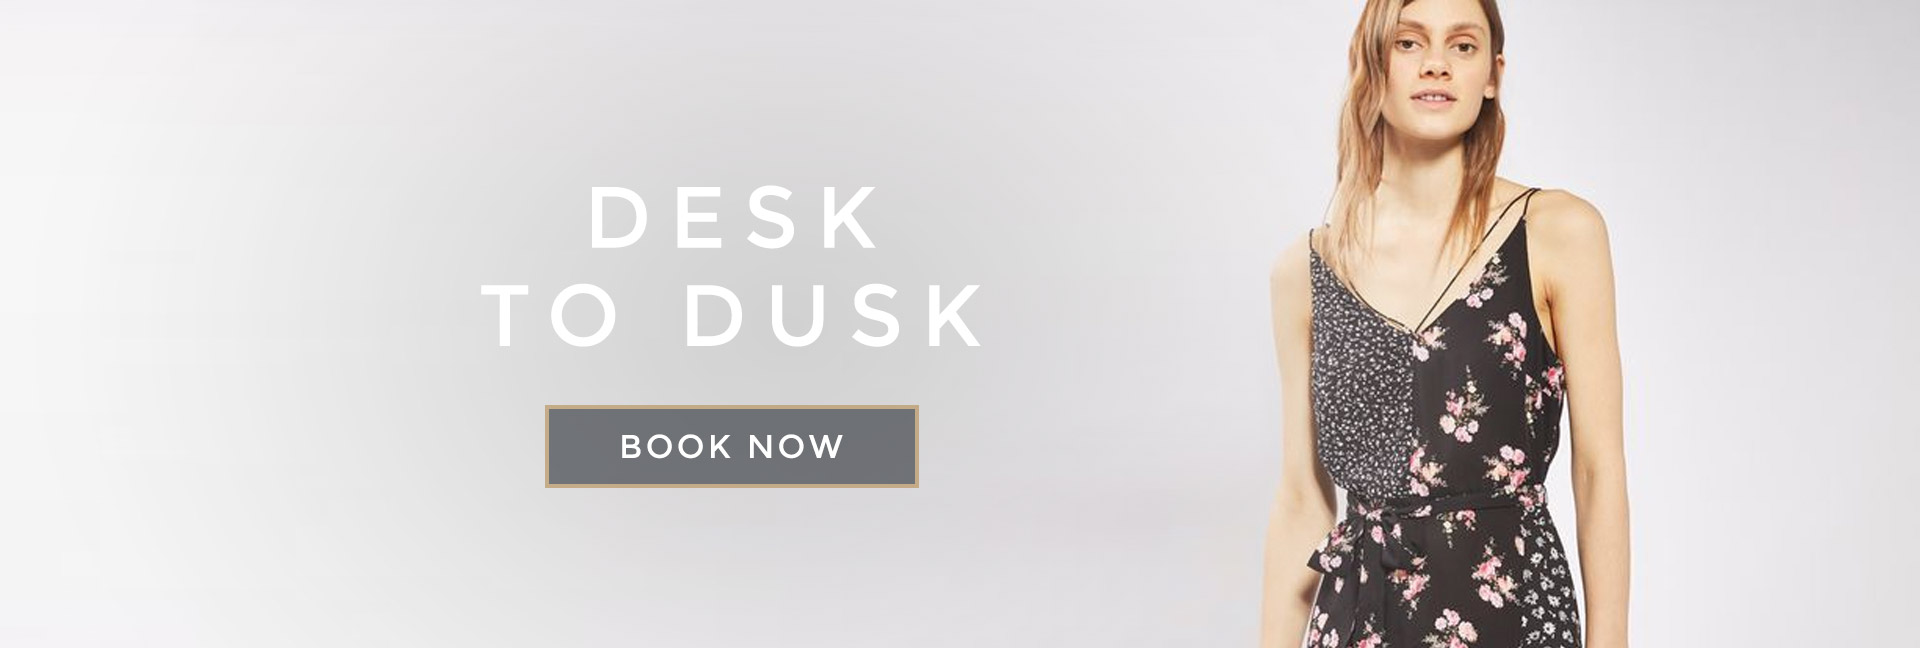 Desk to Dusk at All Bar One Greek Street Leeds - Book your table